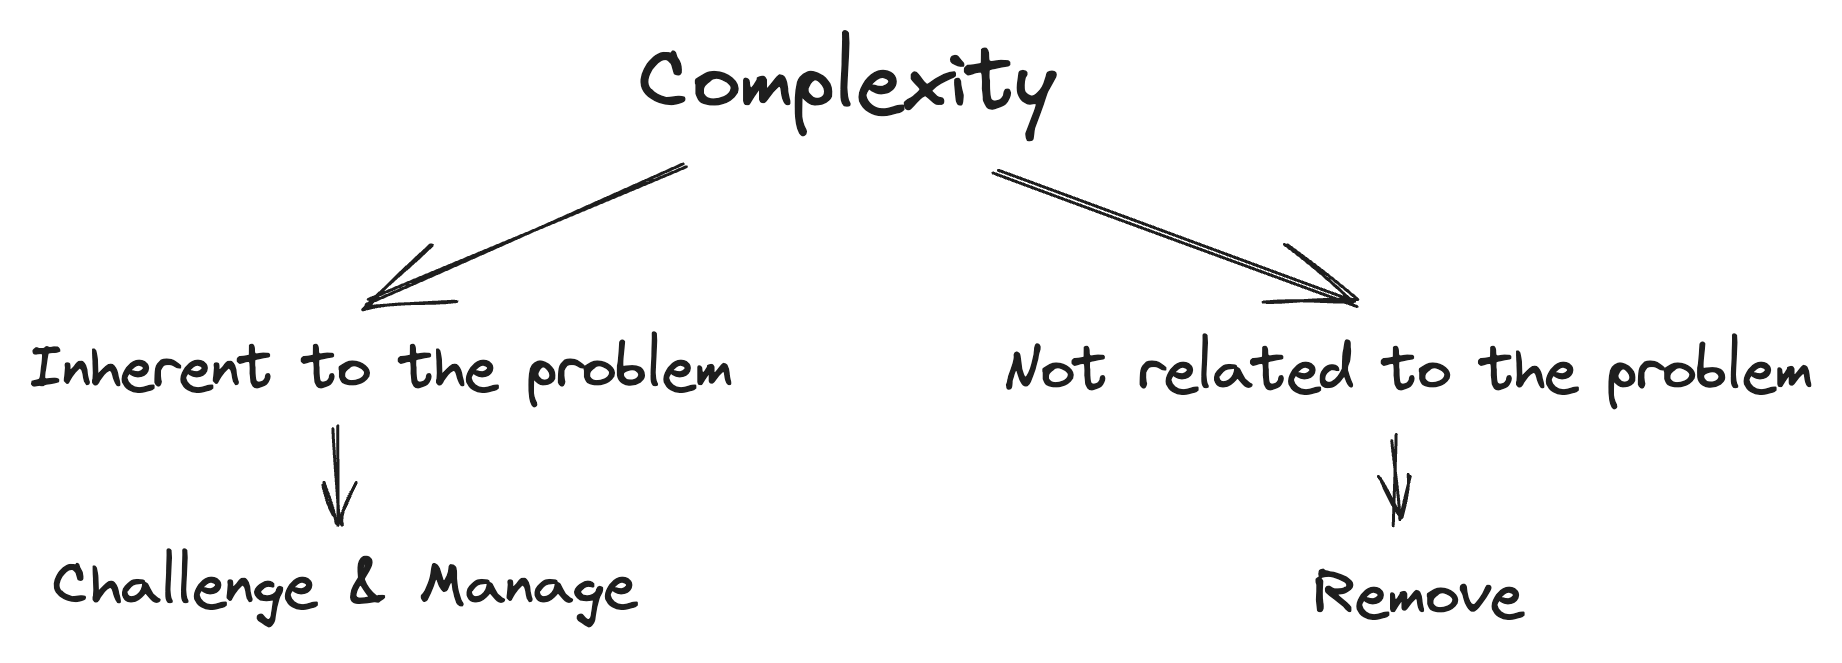 2 kind of complexity schema